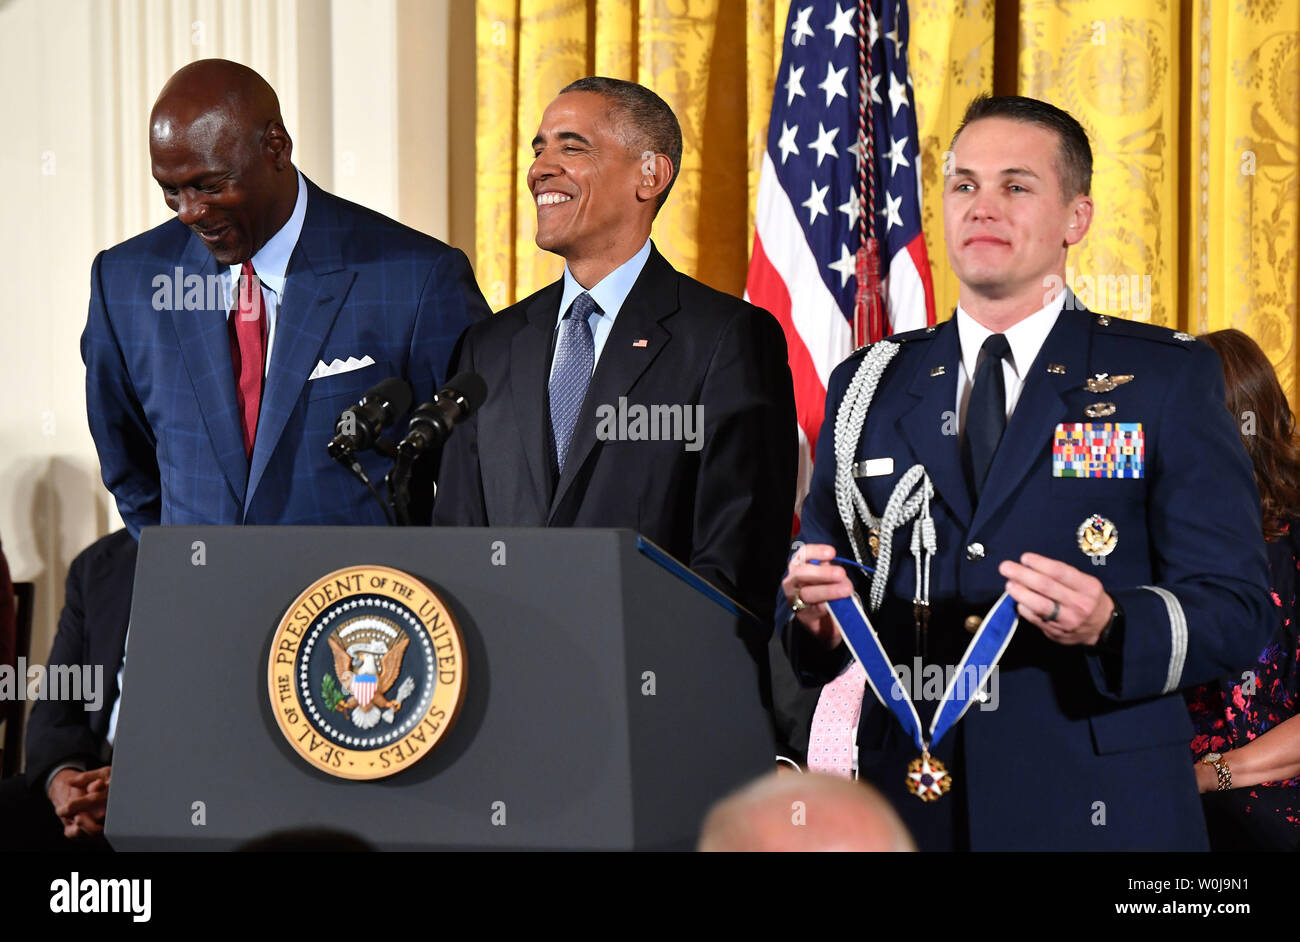 President Barack Obama awards the Presidential Medal of Freedom to  basketball legend Michael Jordan, during a ceremony at the White House in  Washington, D.C. on November 22, 2016. Obama awarded 21 medals